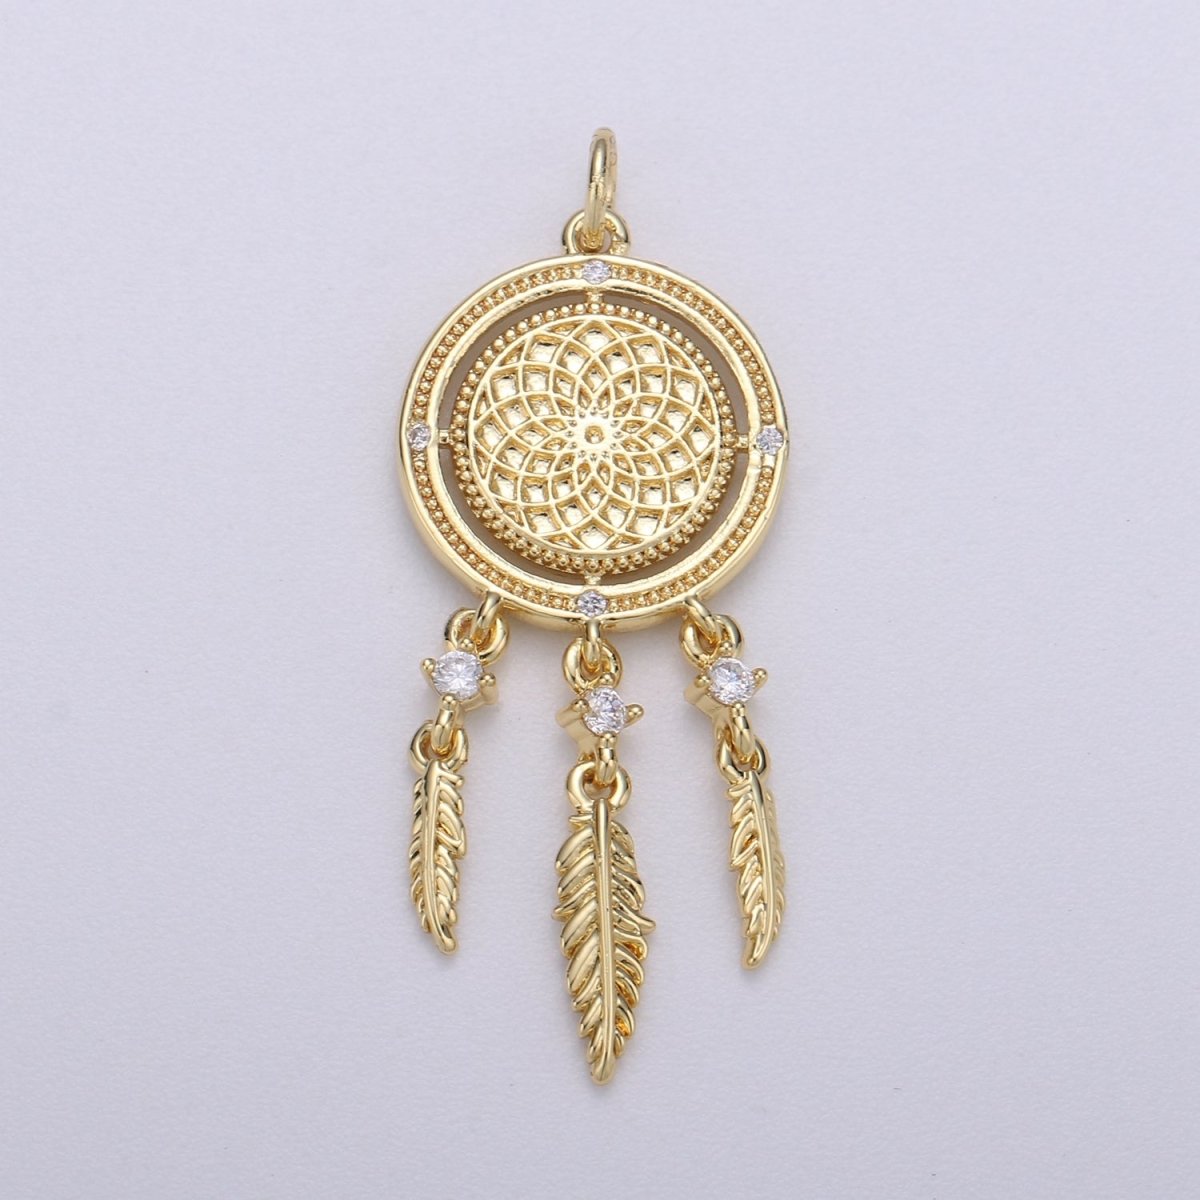 14K Gold Filled Dream Catcher Charm Necklace Pendant Boho Charm for Jewelry Making Bohemian Inspired C-431 - DLUXCA